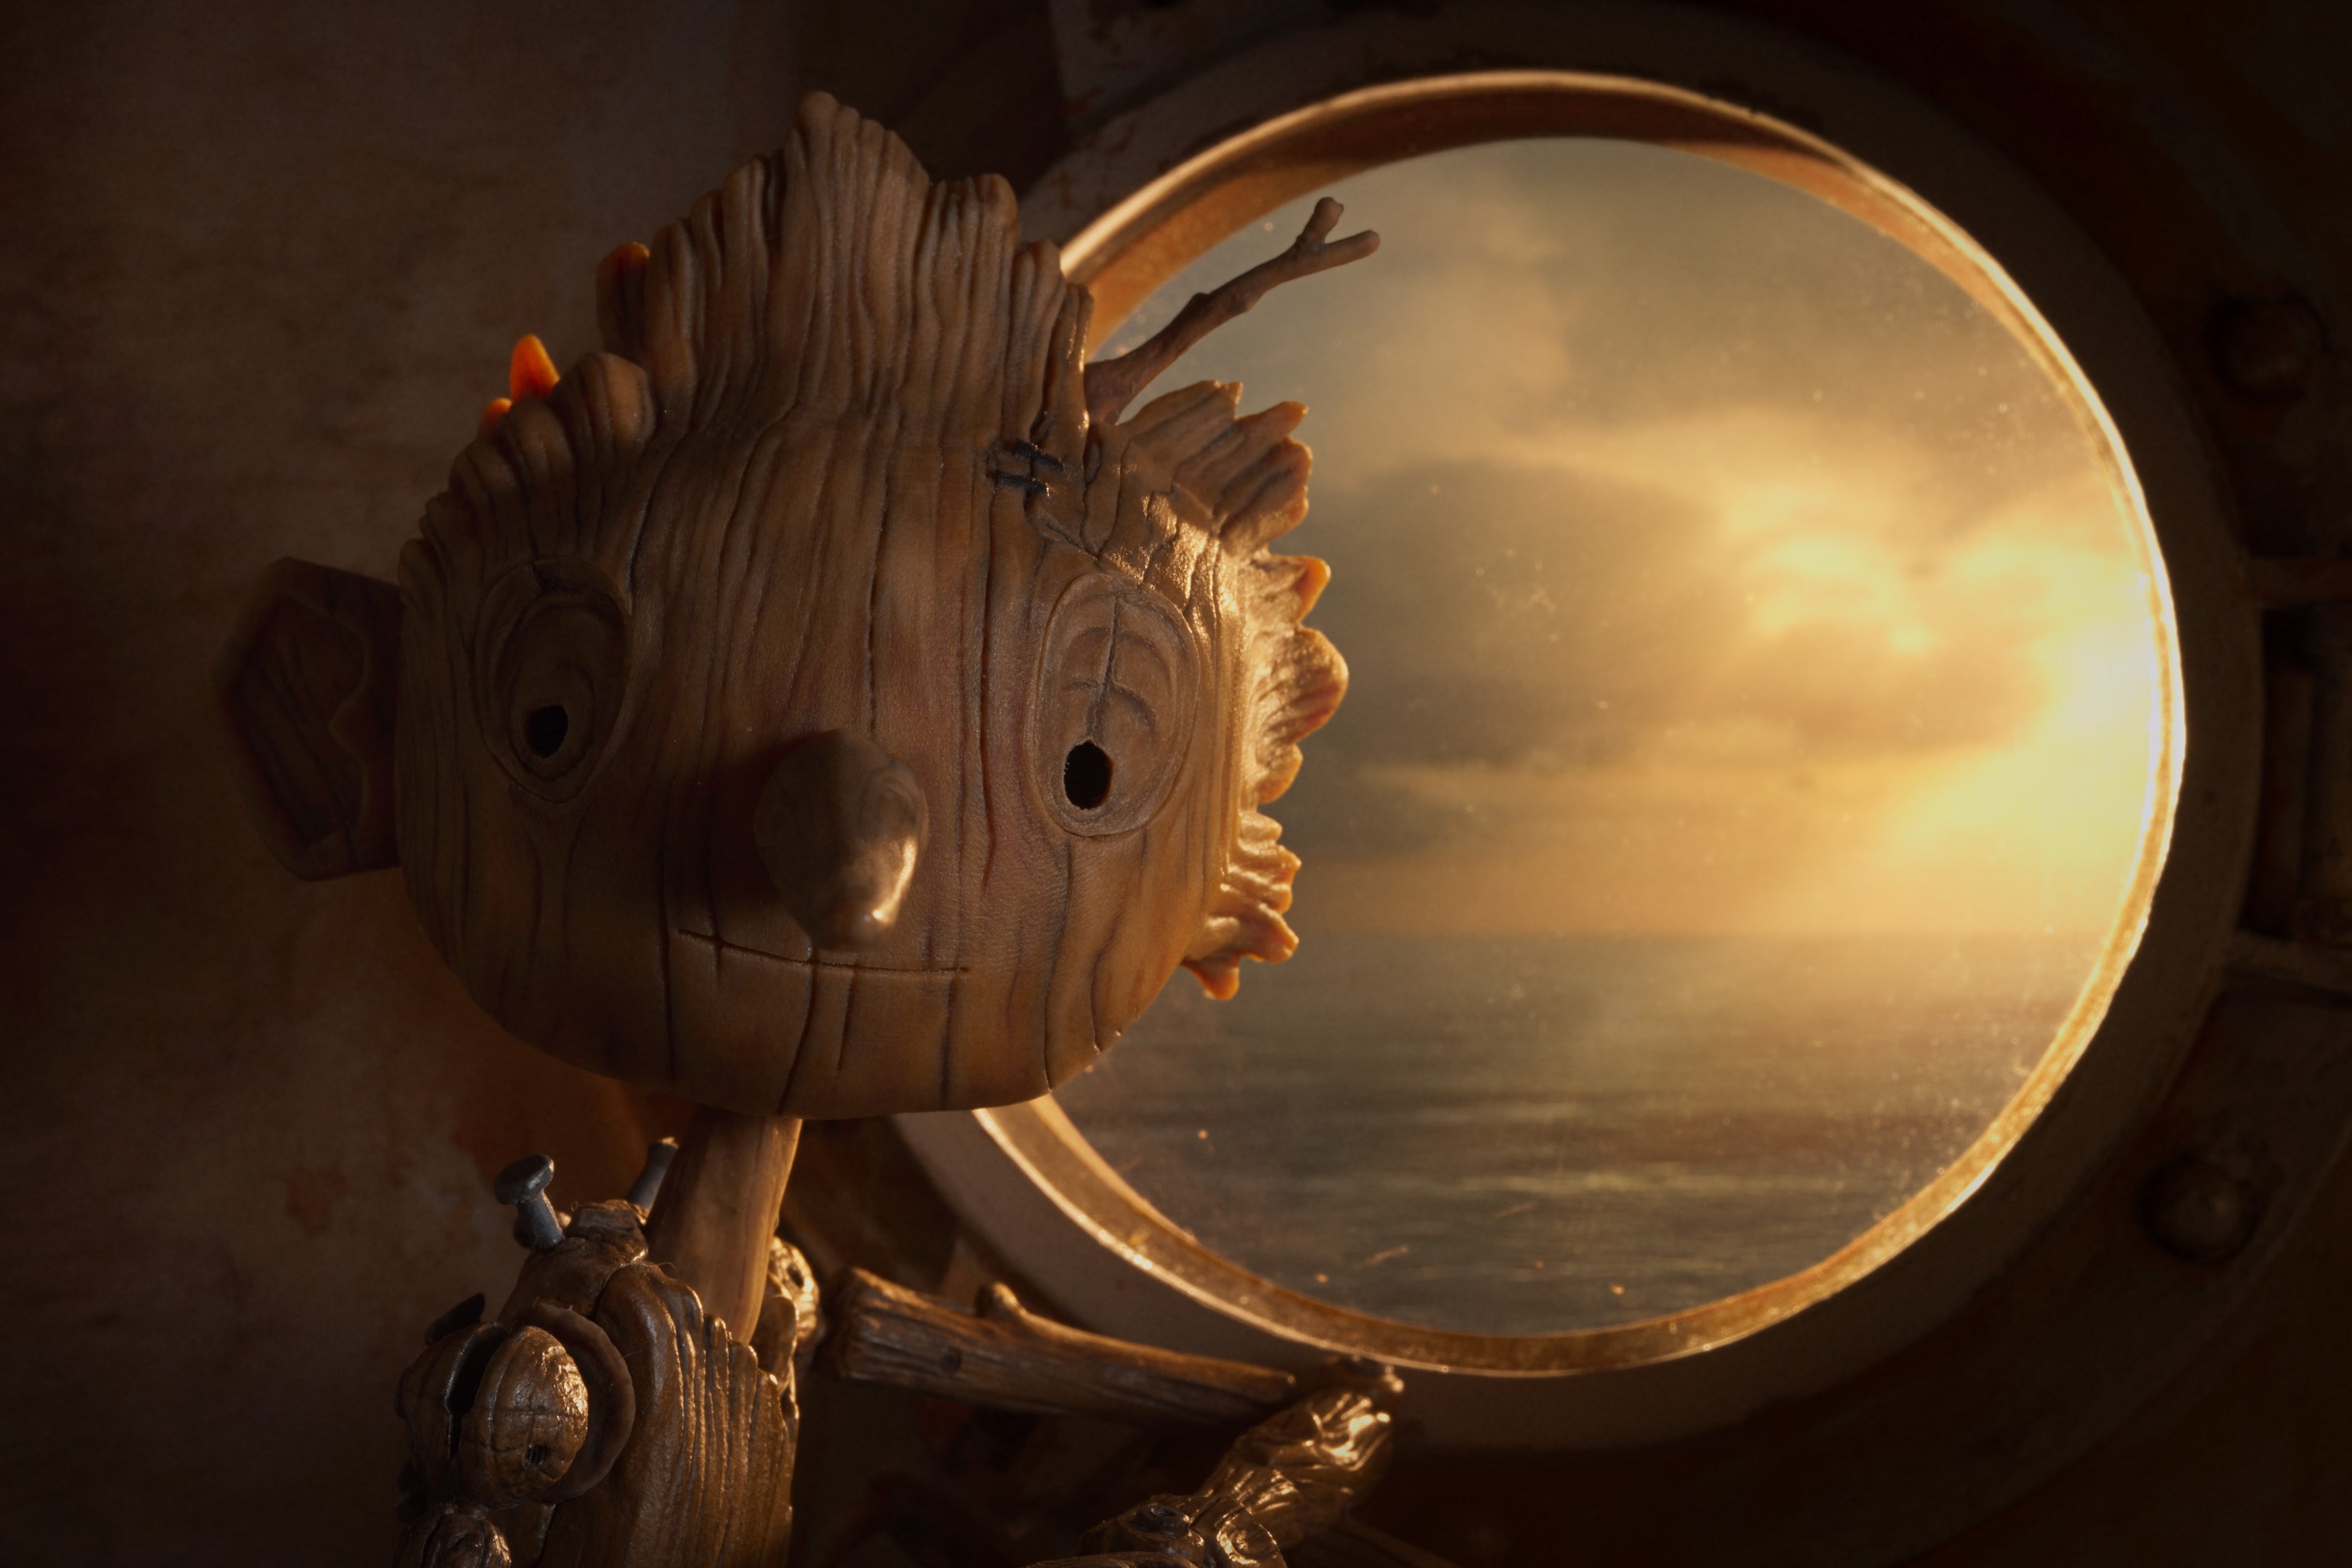 A wooden boy stares into the camera, a faint smile on his face, as golden light filters through a porthole window behind him